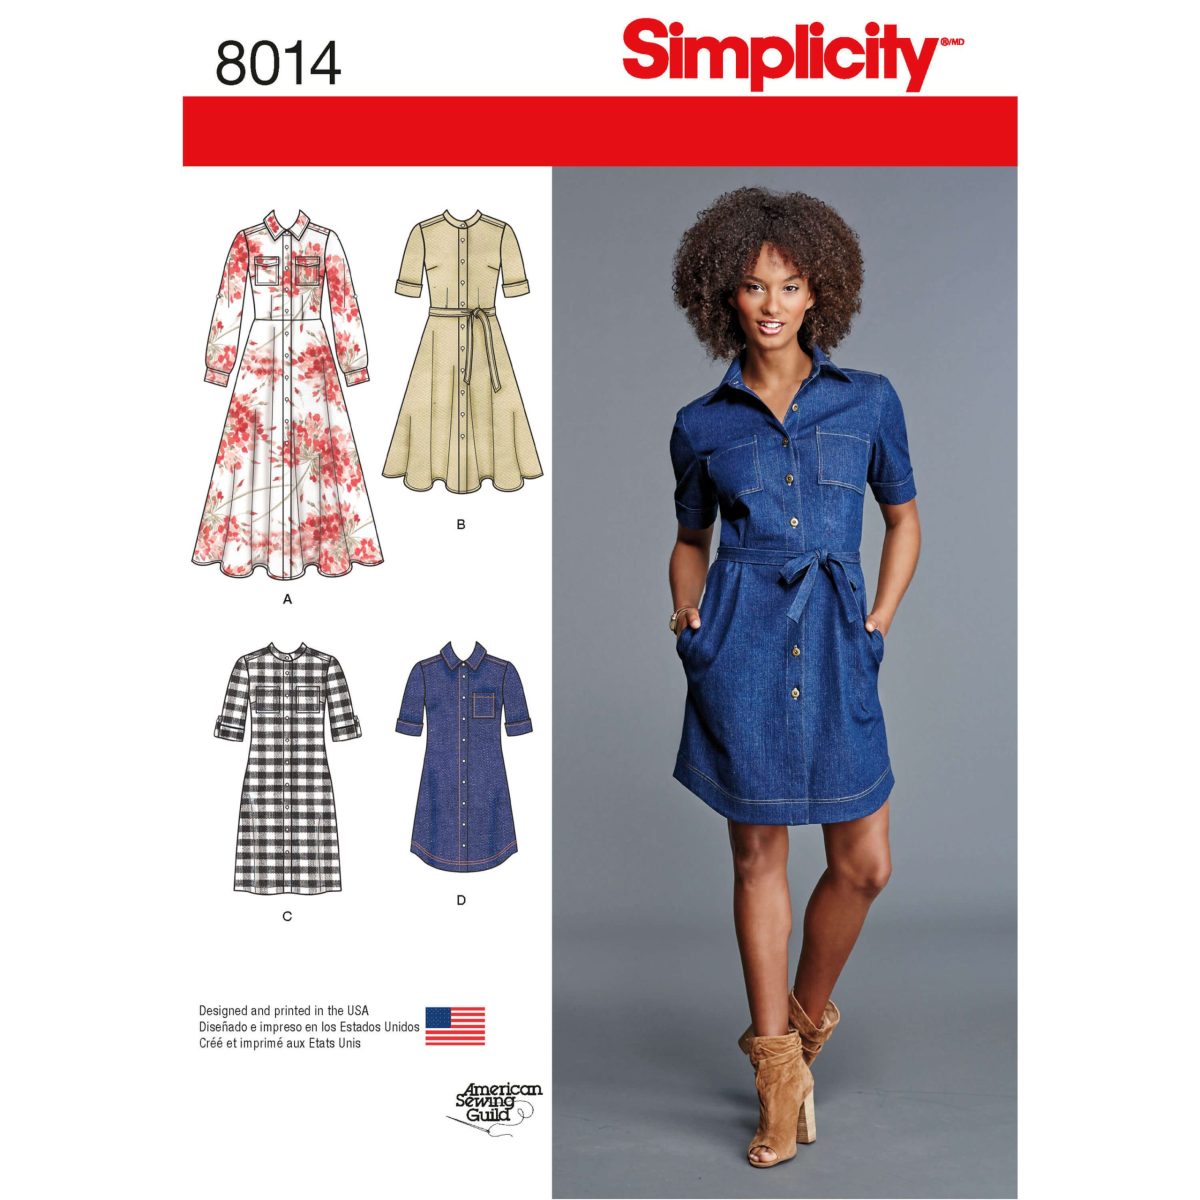 Simplicity Sewing Pattern 8014 Misses' Shirt Dress